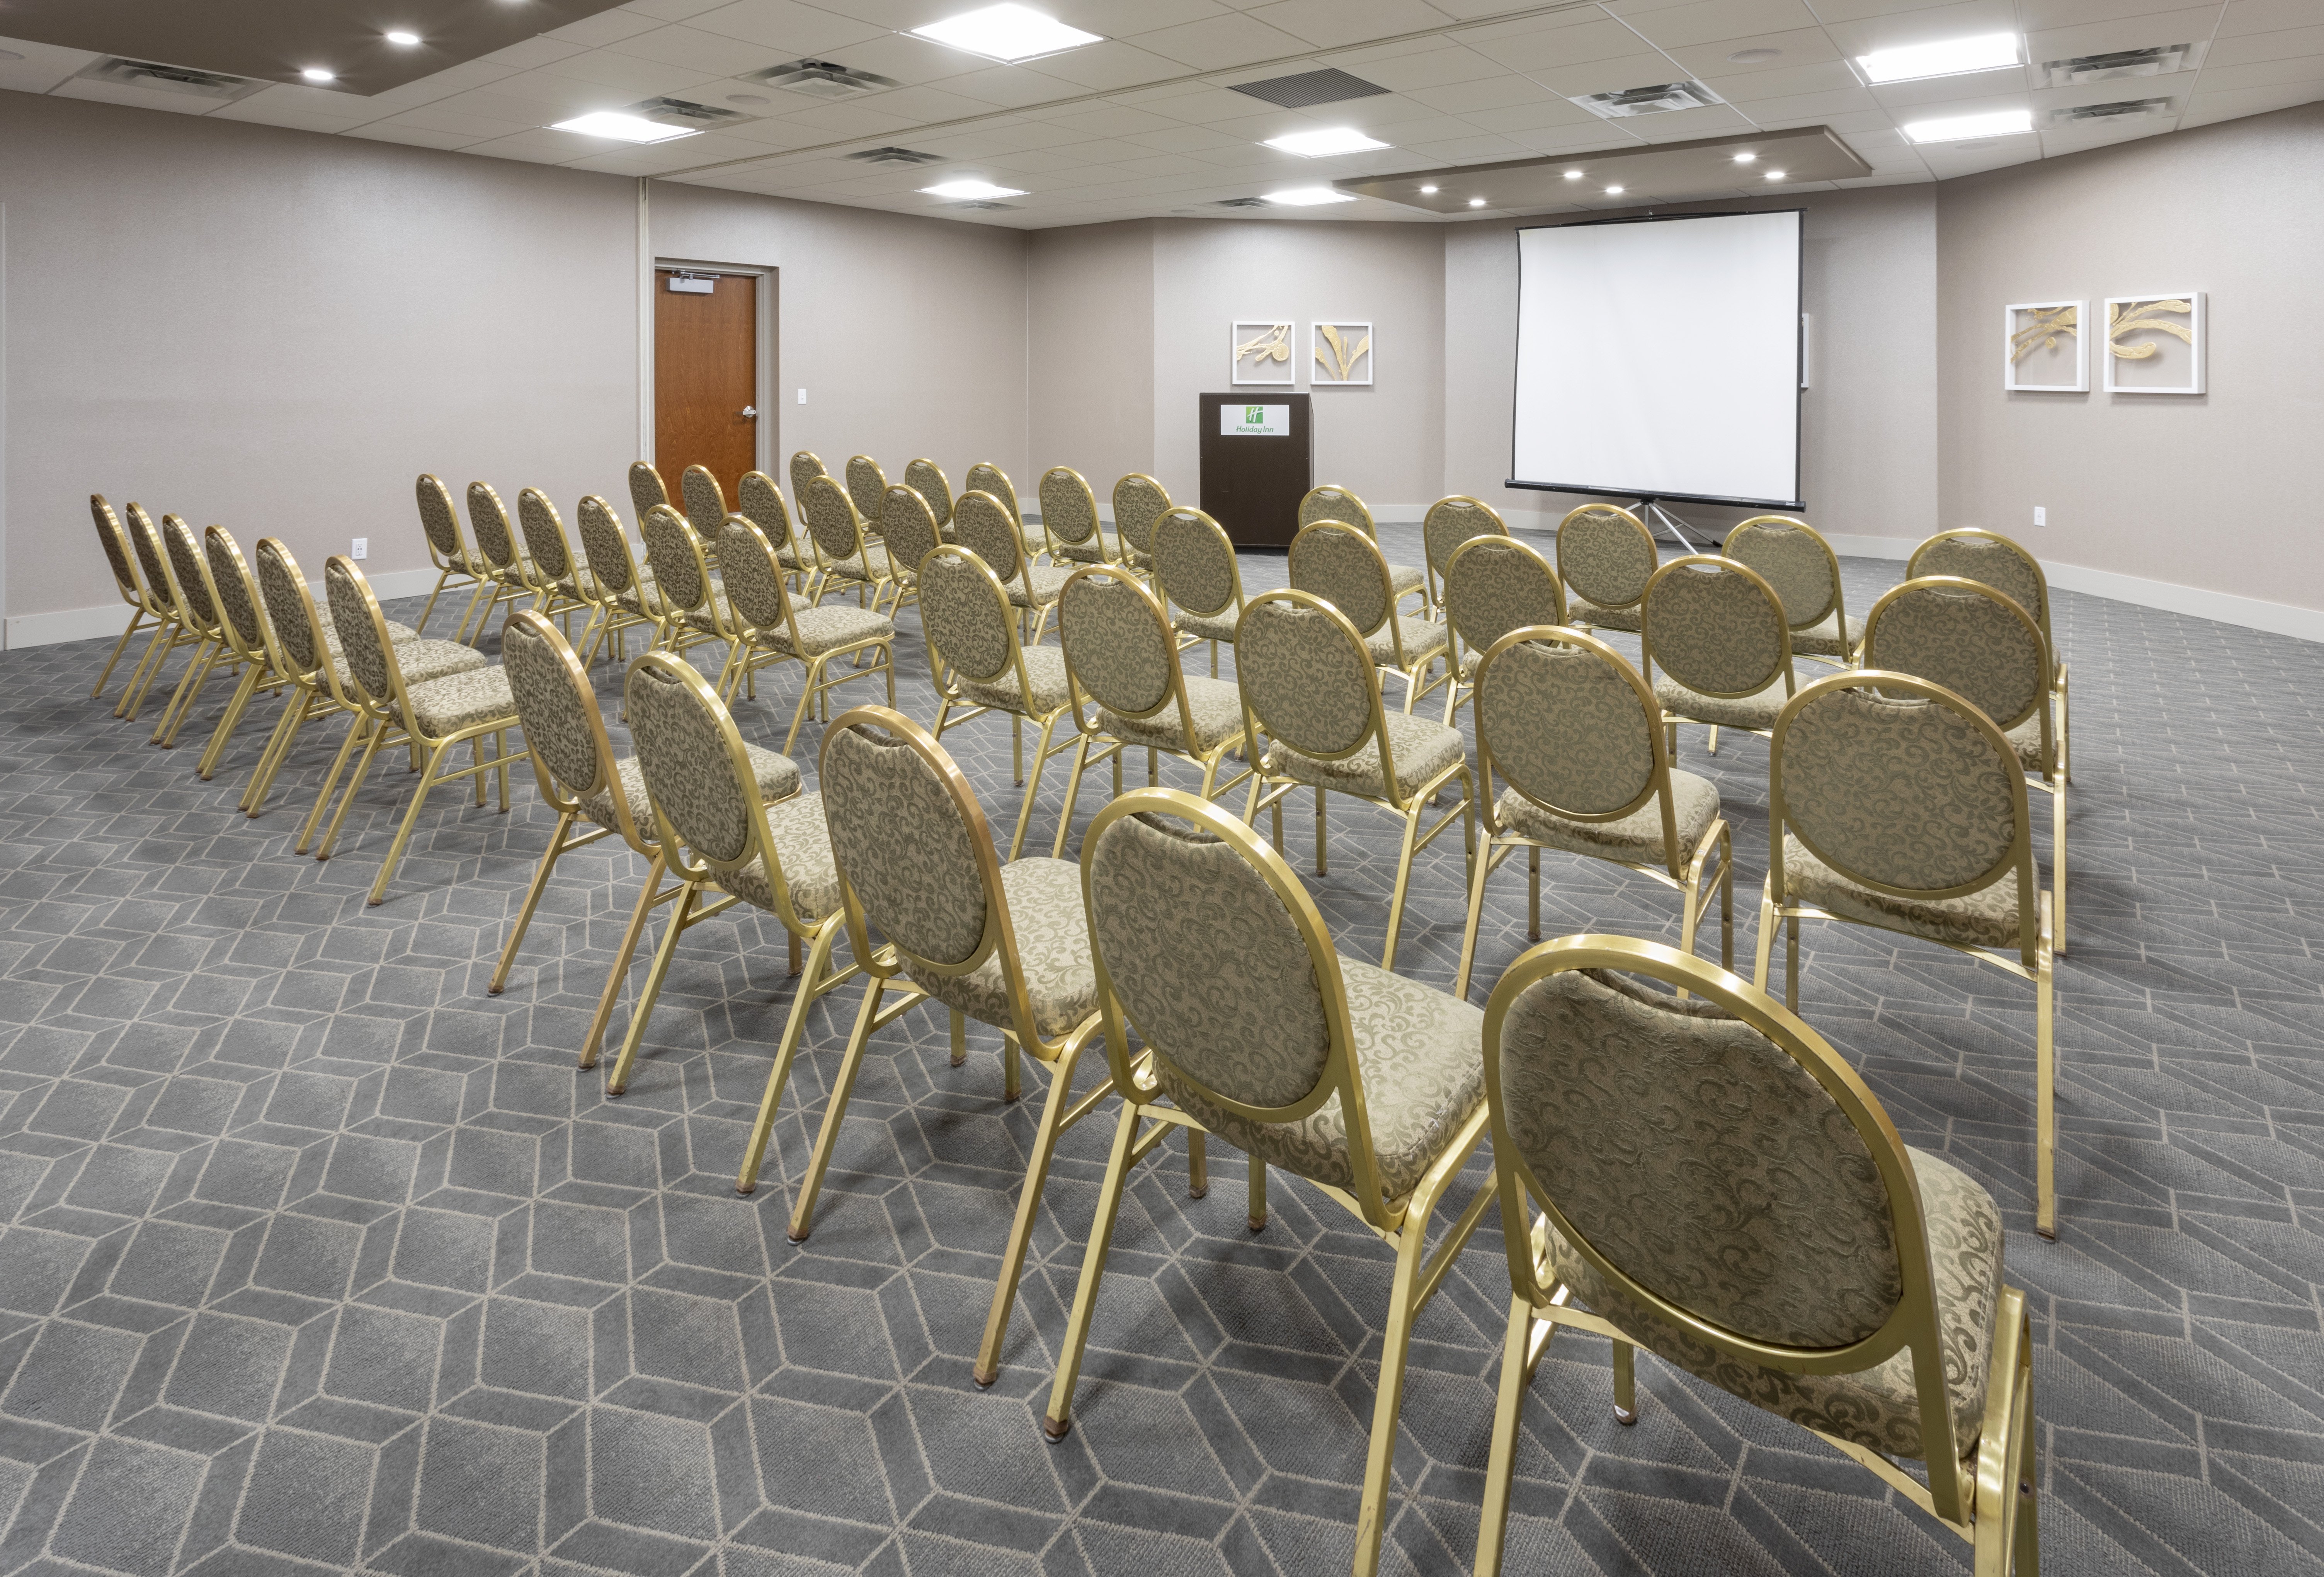 Meeting rooms large or small to meet your needs